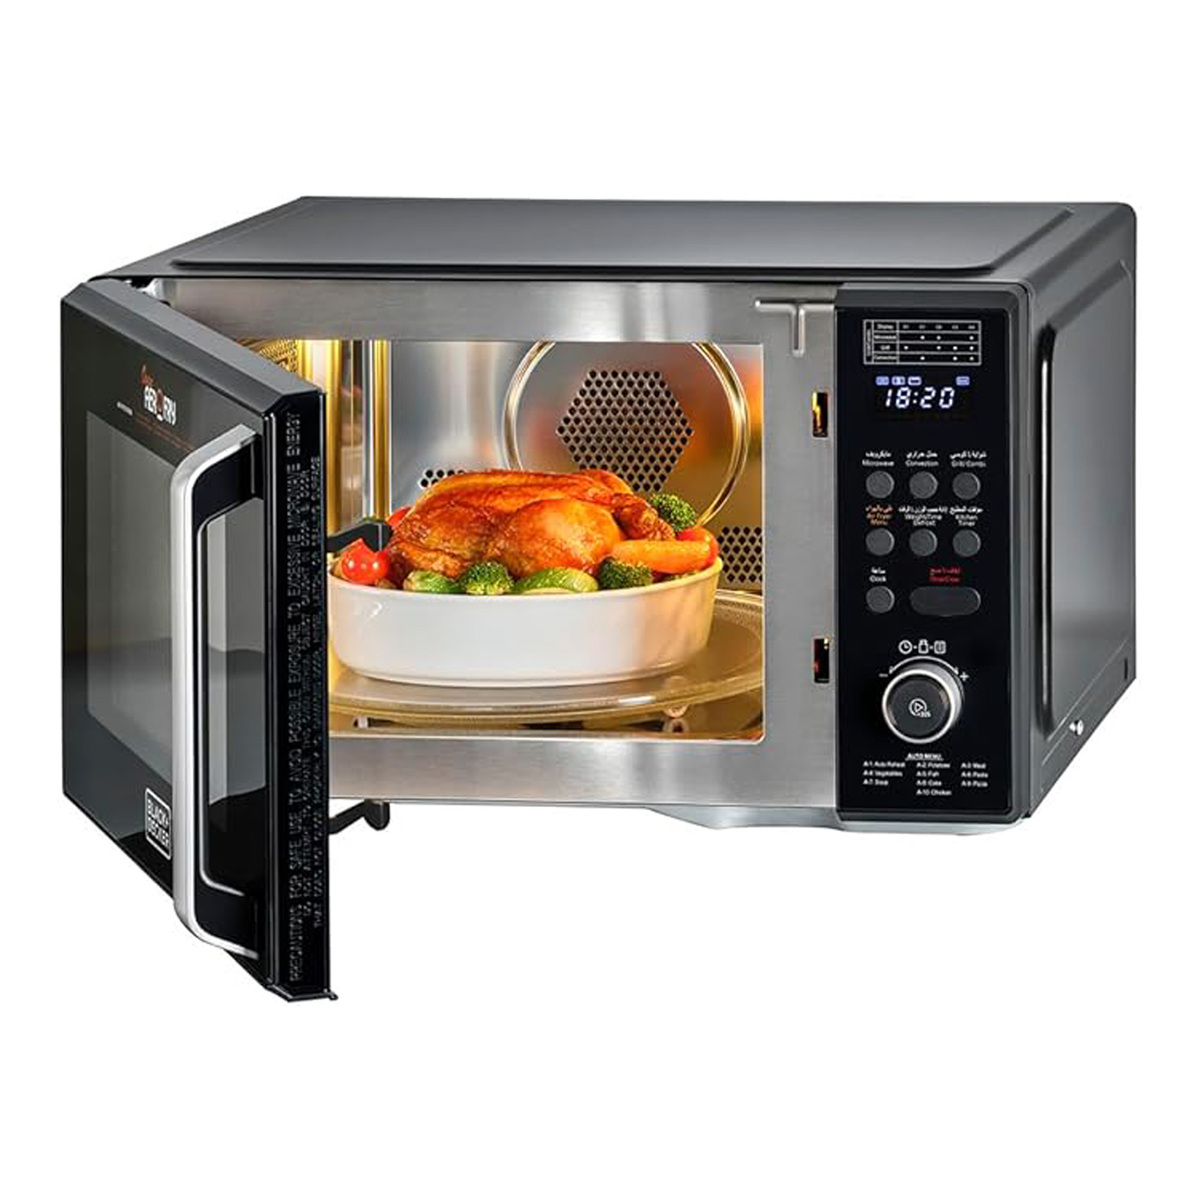 BLACK+DECKER 4-in-1 Digital Microwave Oven with Air Fryer, Grill & Convection, 29 L, MZAF2910